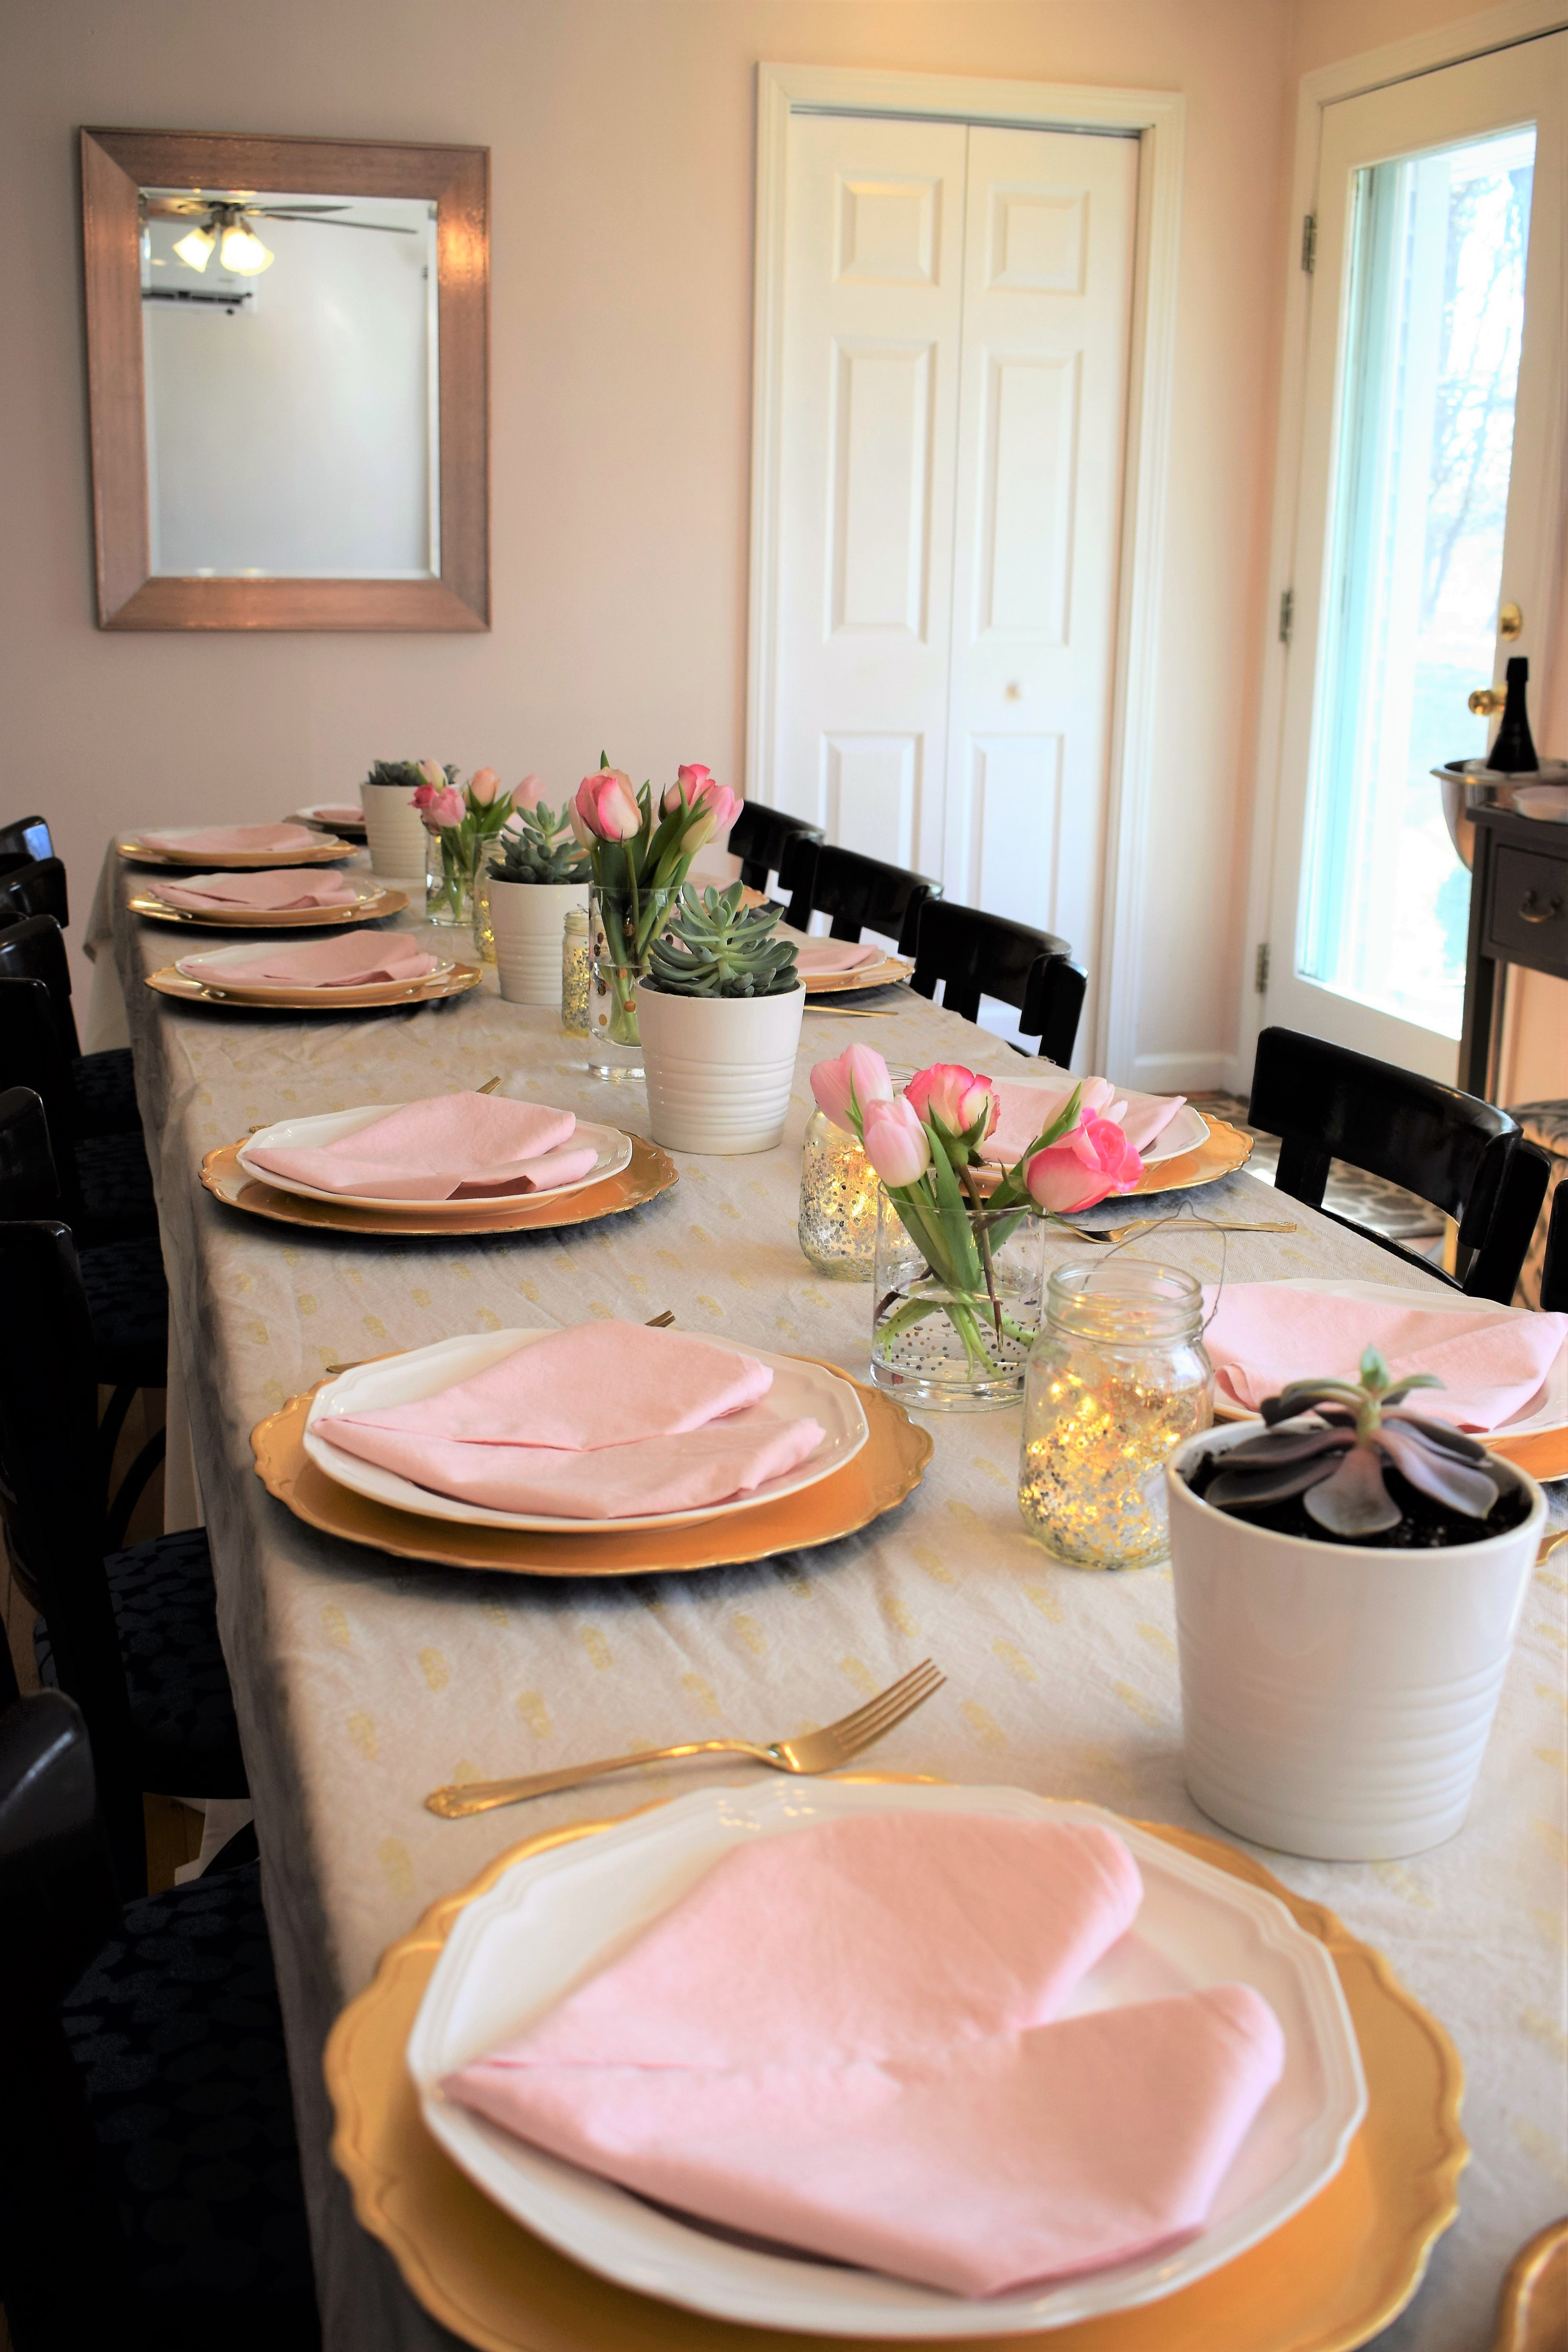 Galentine's Blush Pink Brunch Decorations   The Well Dressed Table